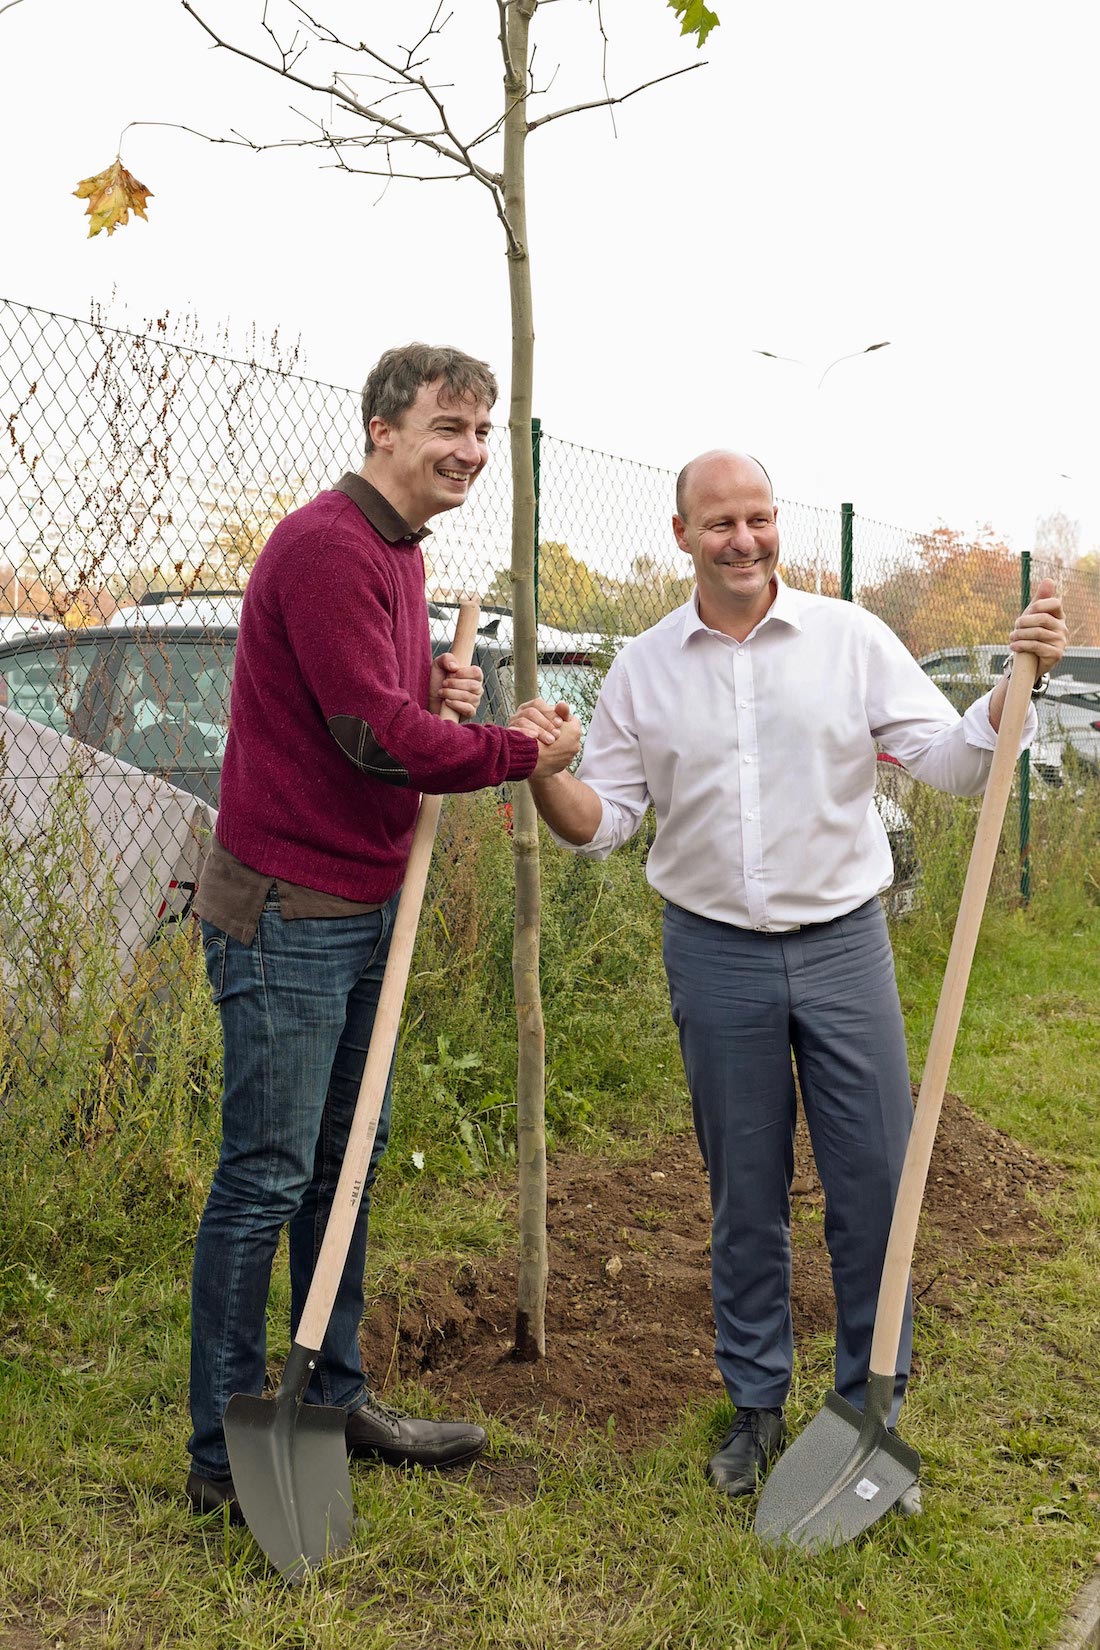 With the representative of the City of Prague City  and the Mayor of Lysolaje Petr Hlubuček planting trees at Prosek.